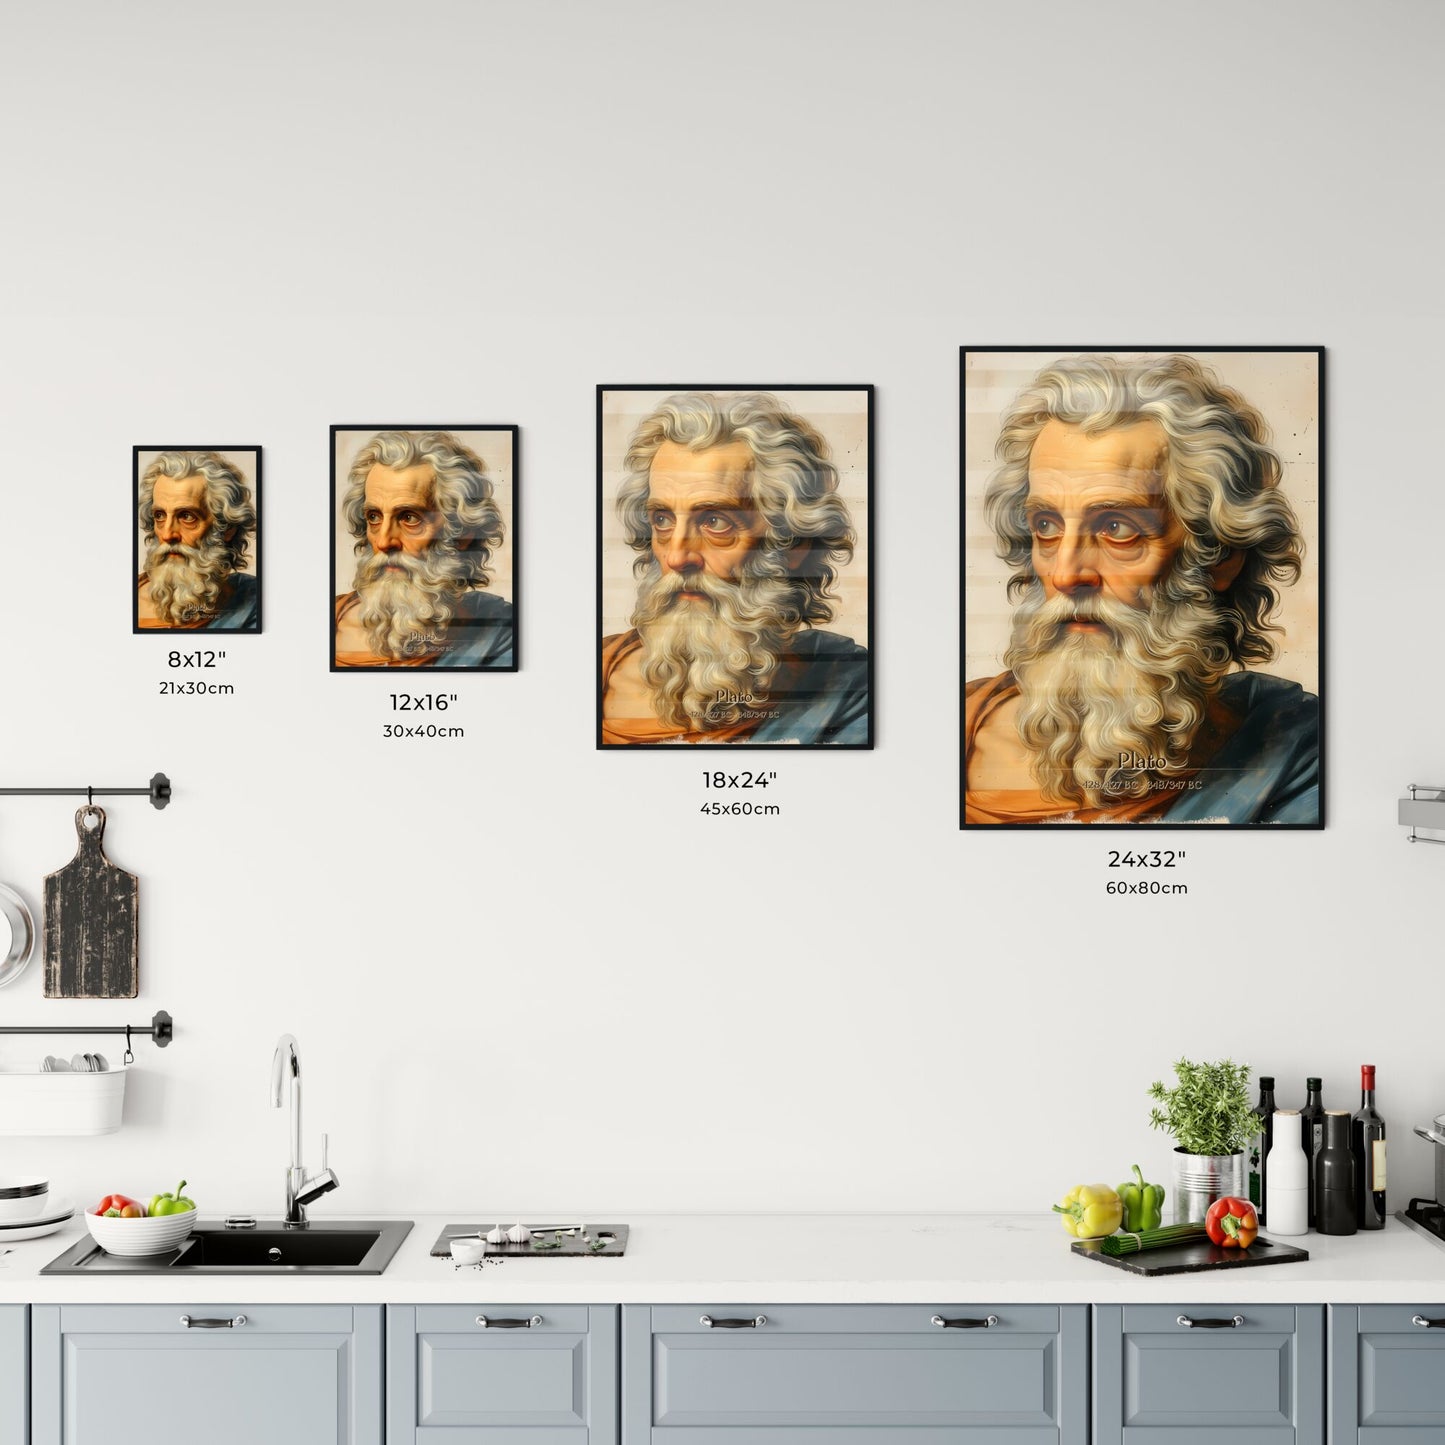 Plato, 428/427 BC - 348/347 BC, A Poster of a painting of a man with a long white beard Default Title